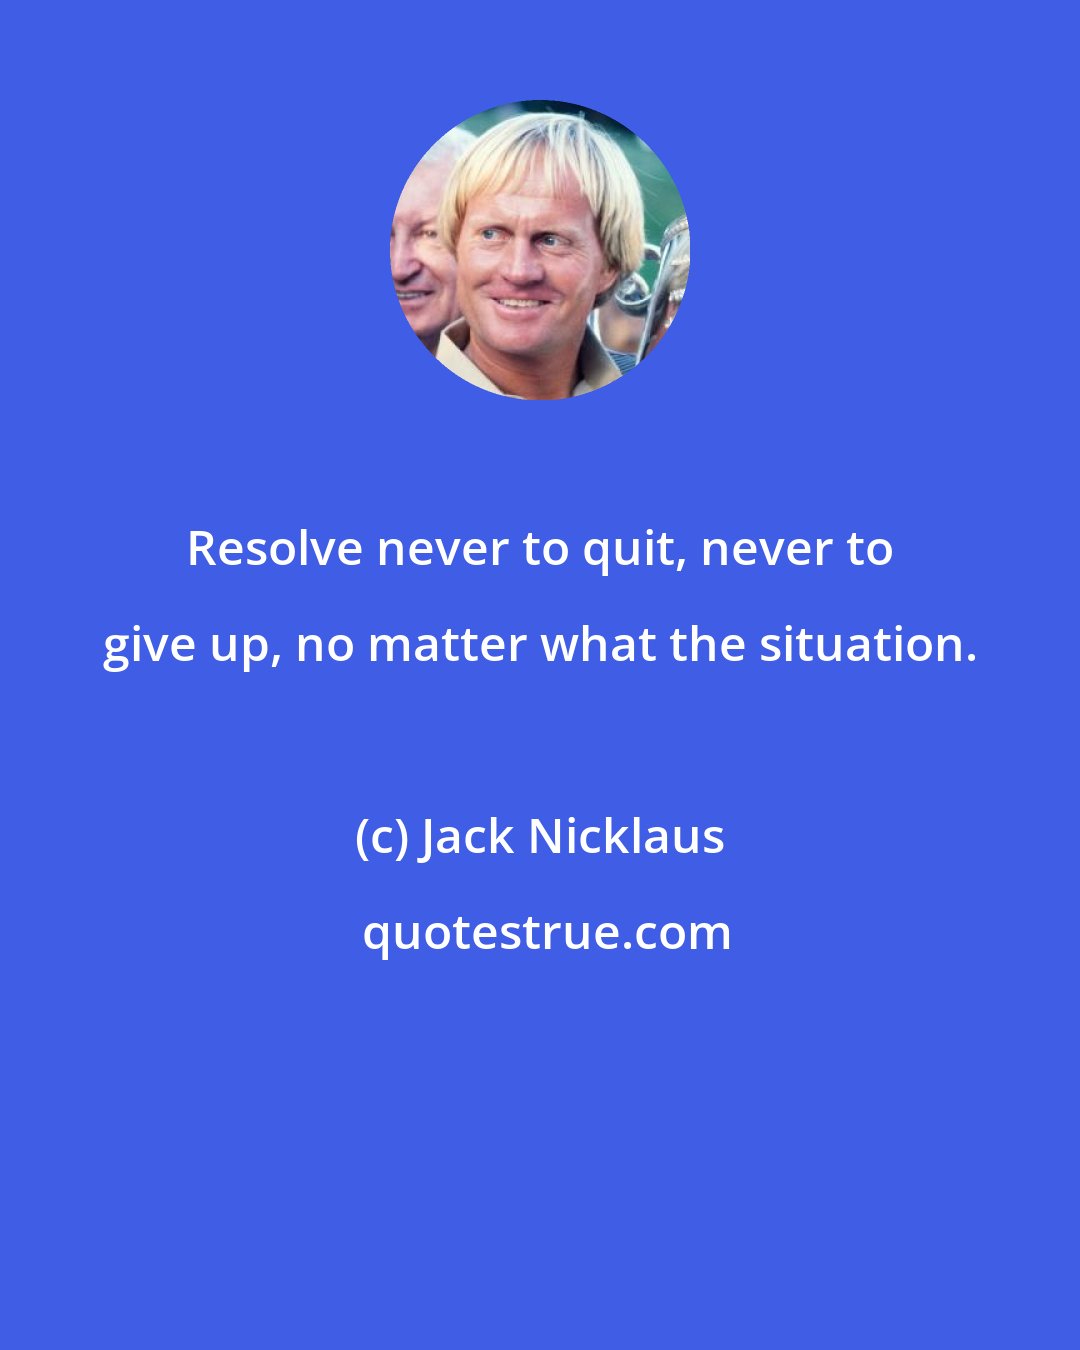 Jack Nicklaus: Resolve never to quit, never to give up, no matter what the situation.